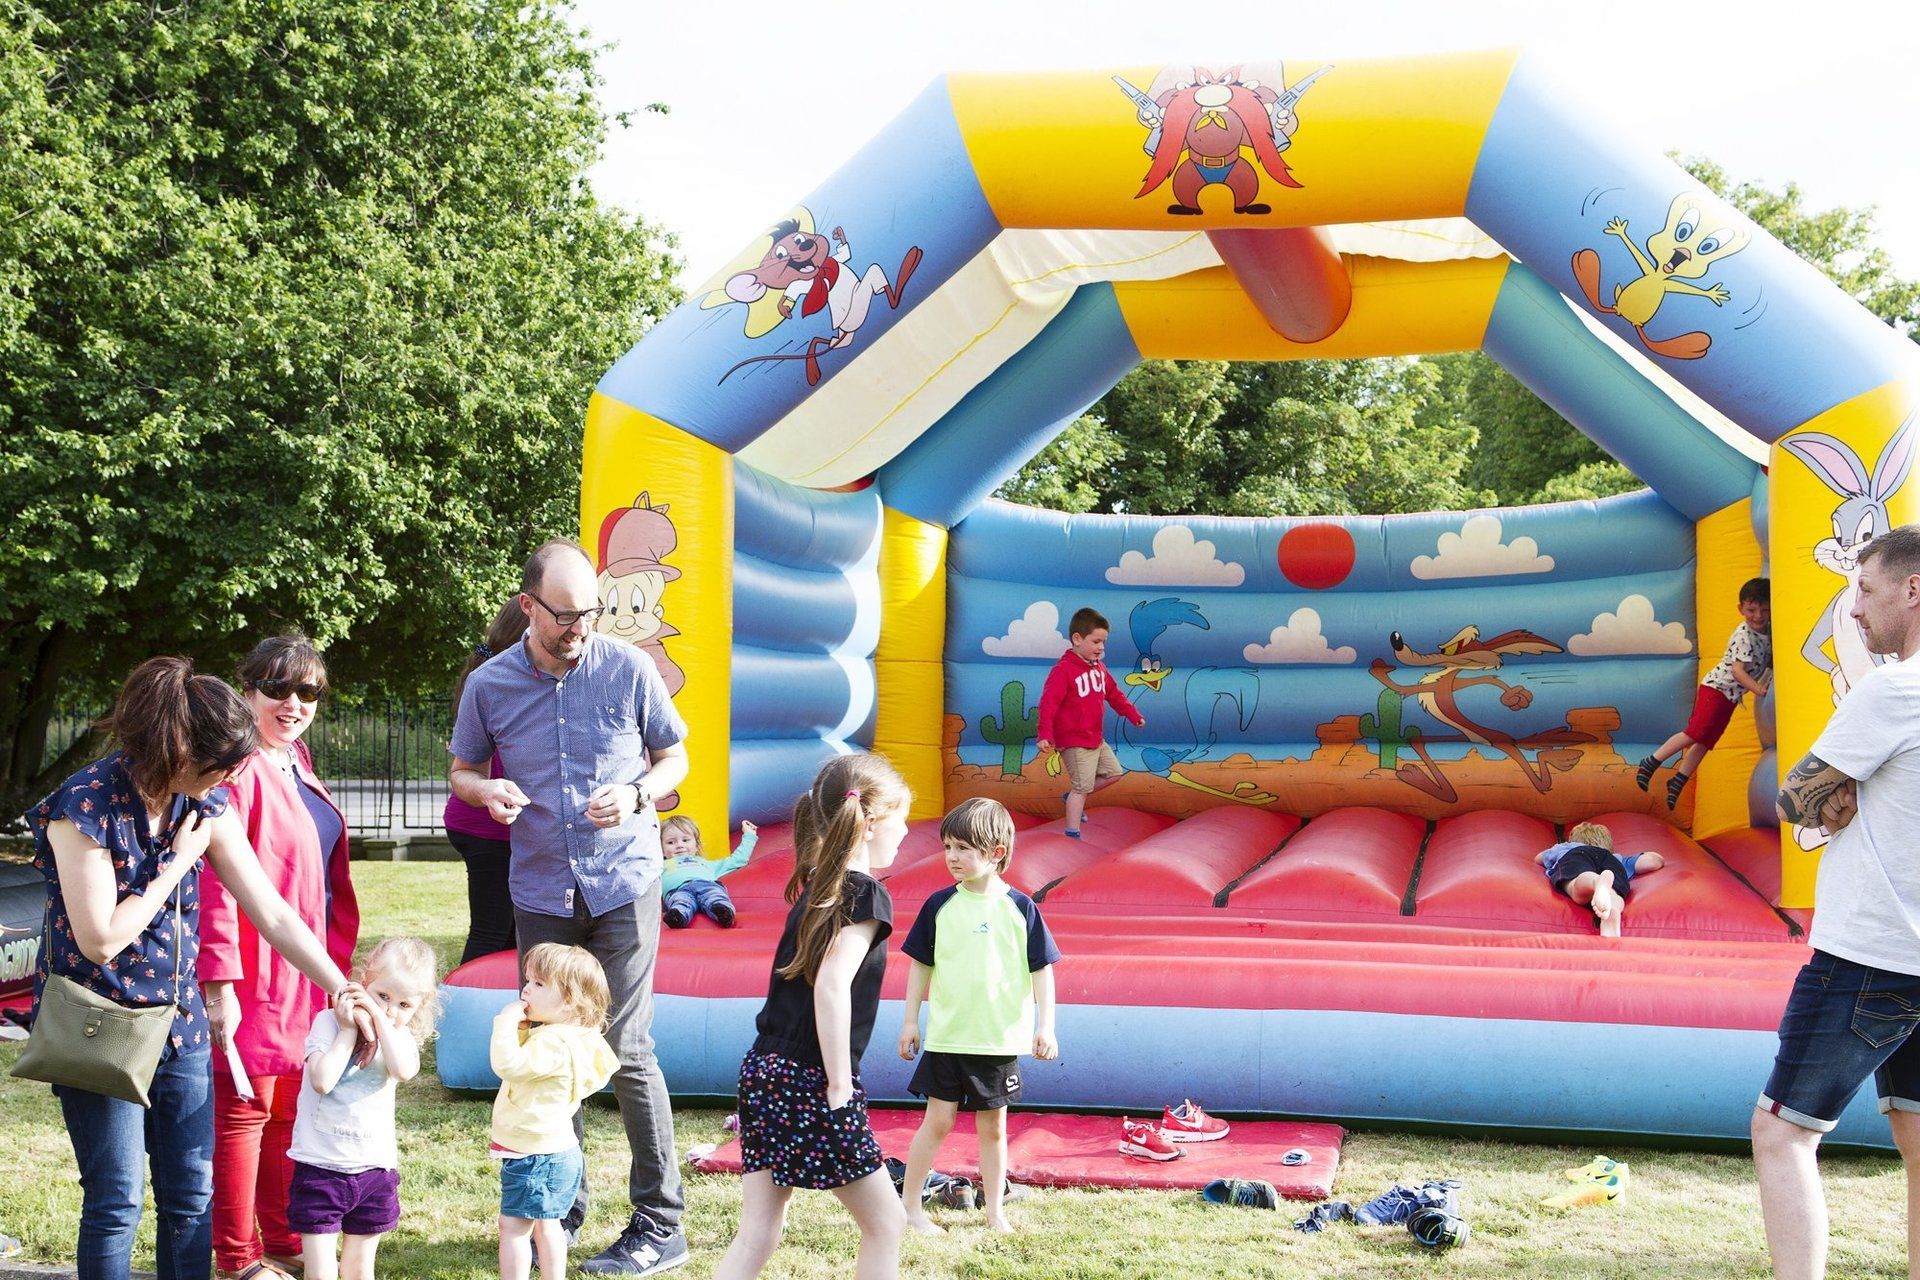 A group of people are standing around a bouncy house.